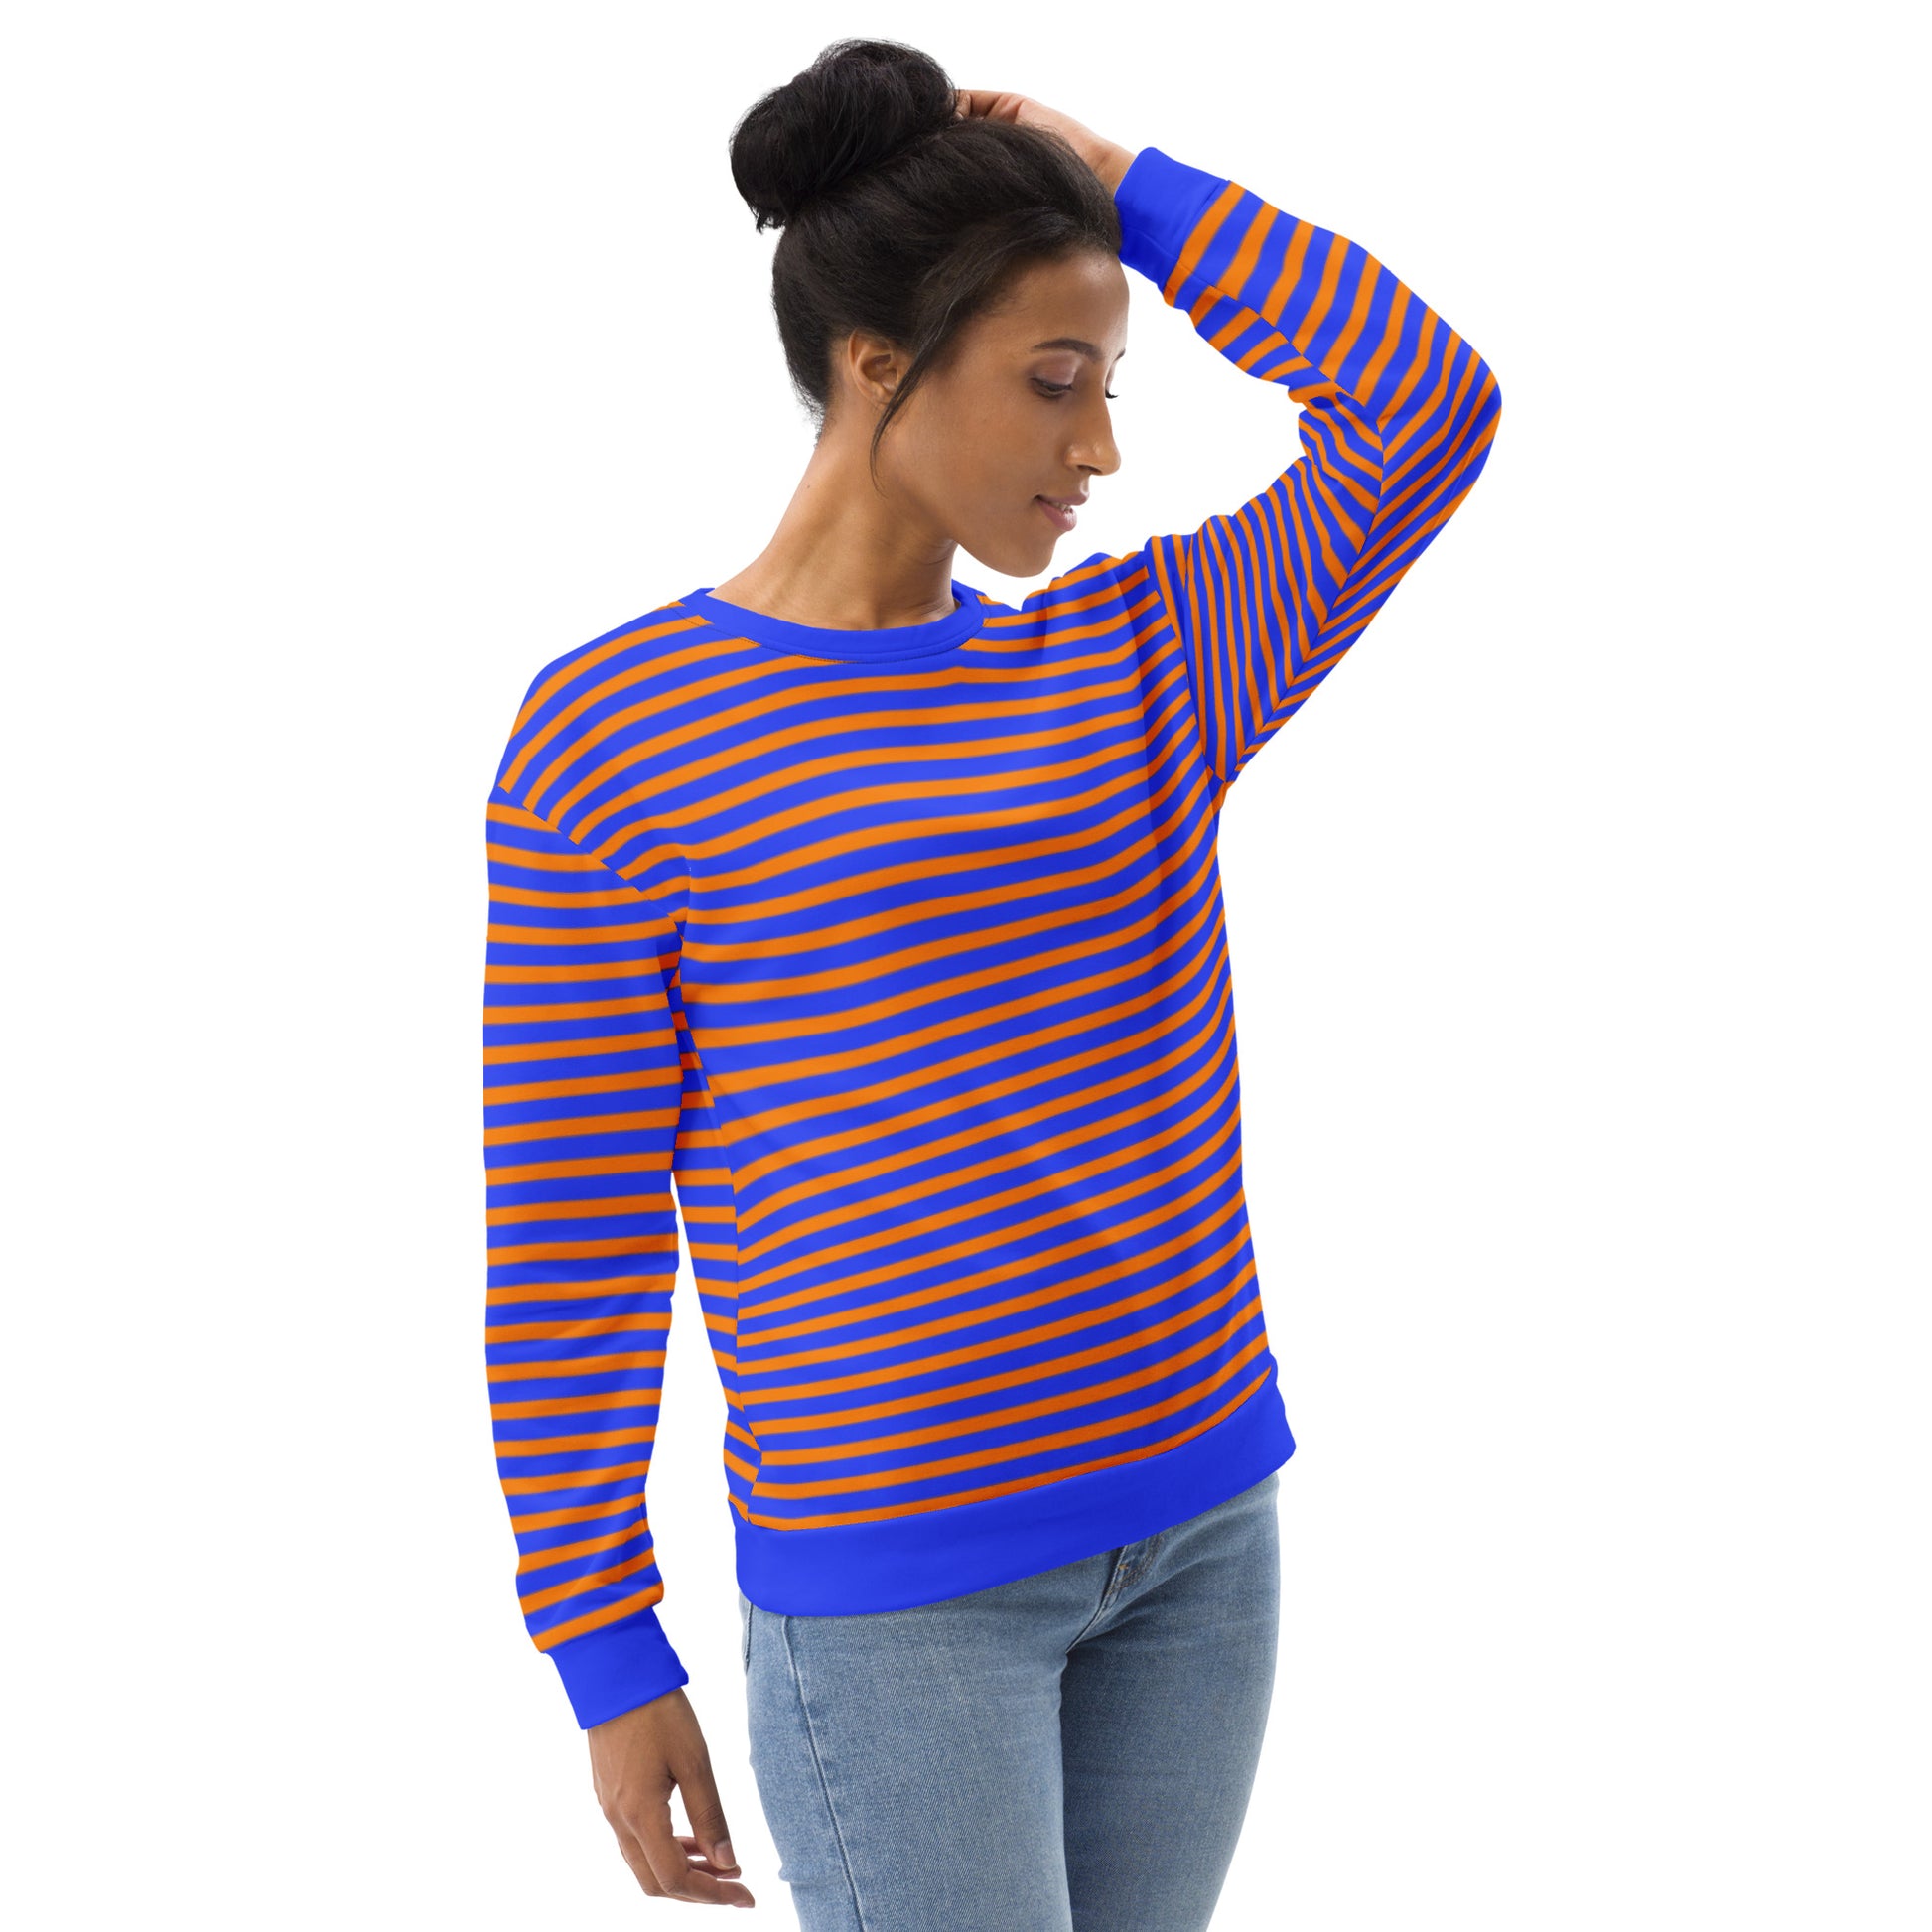 Blue and Orange Sweater: A Soft and Warm Knit for Men and Women